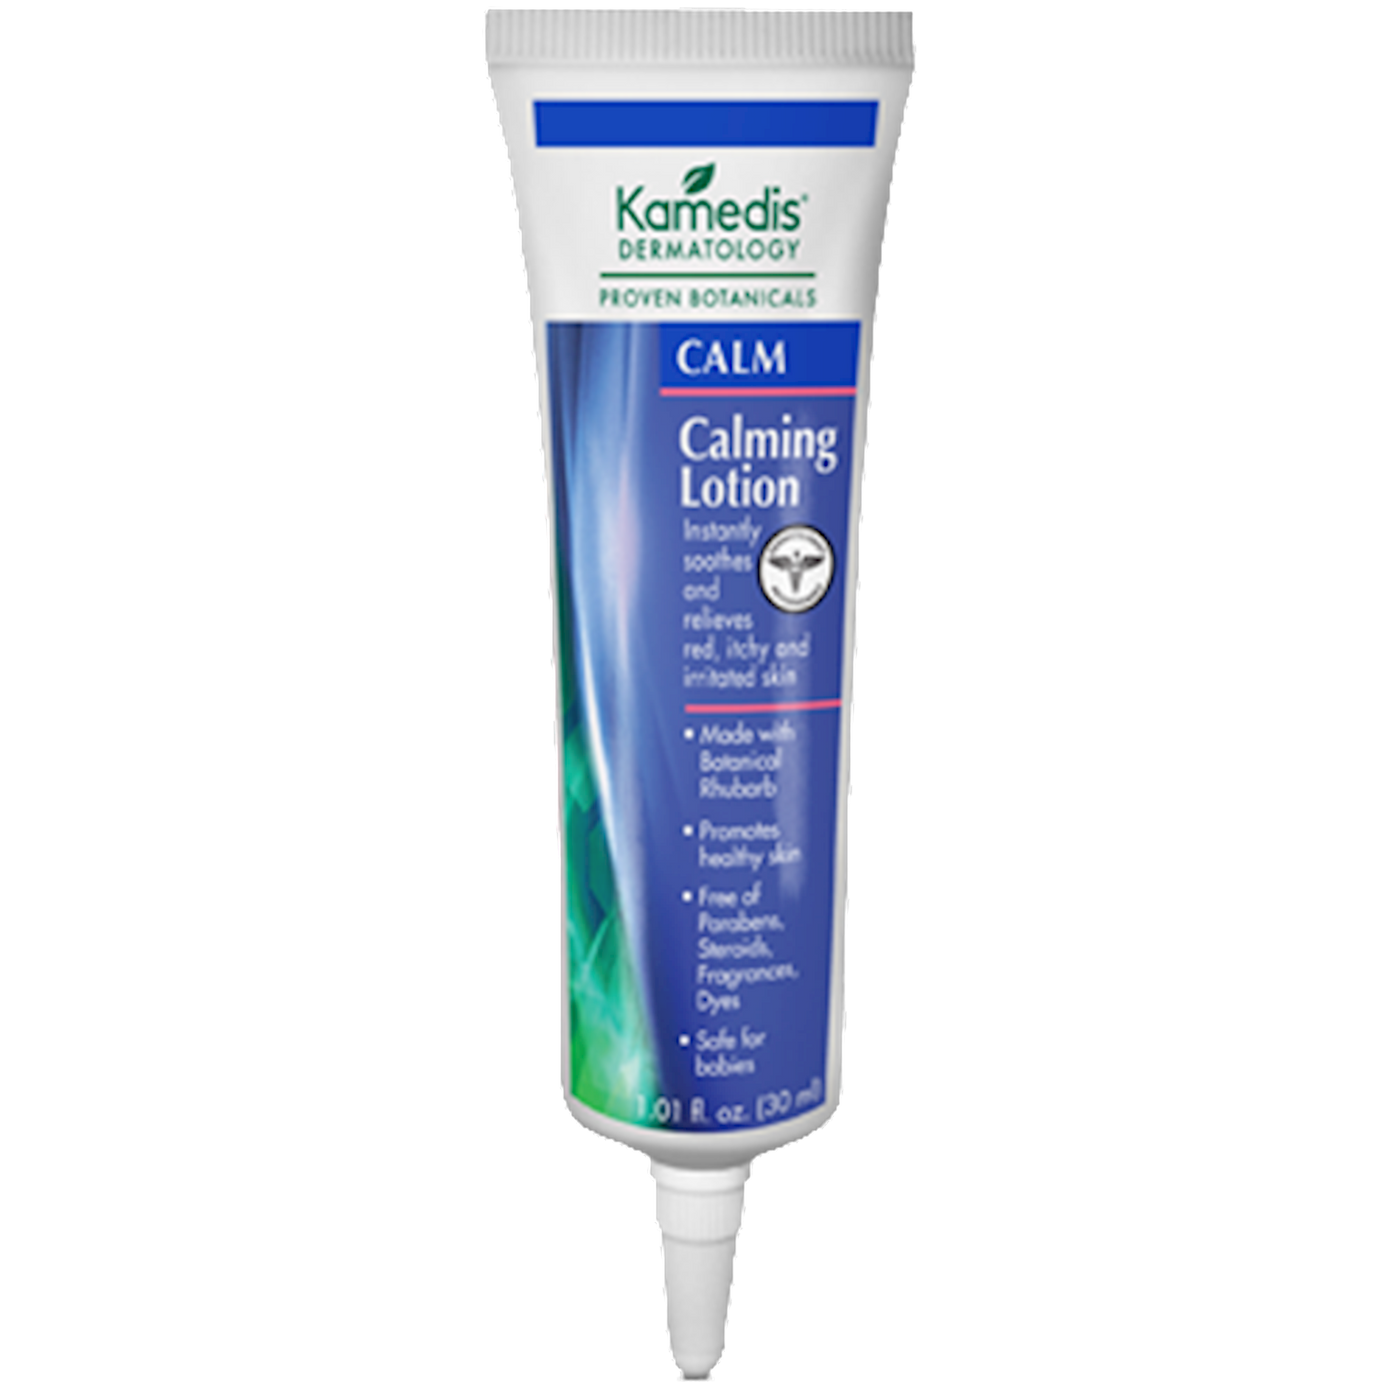 CALM Calming Lotion 1.01 fl oz Curated Wellness